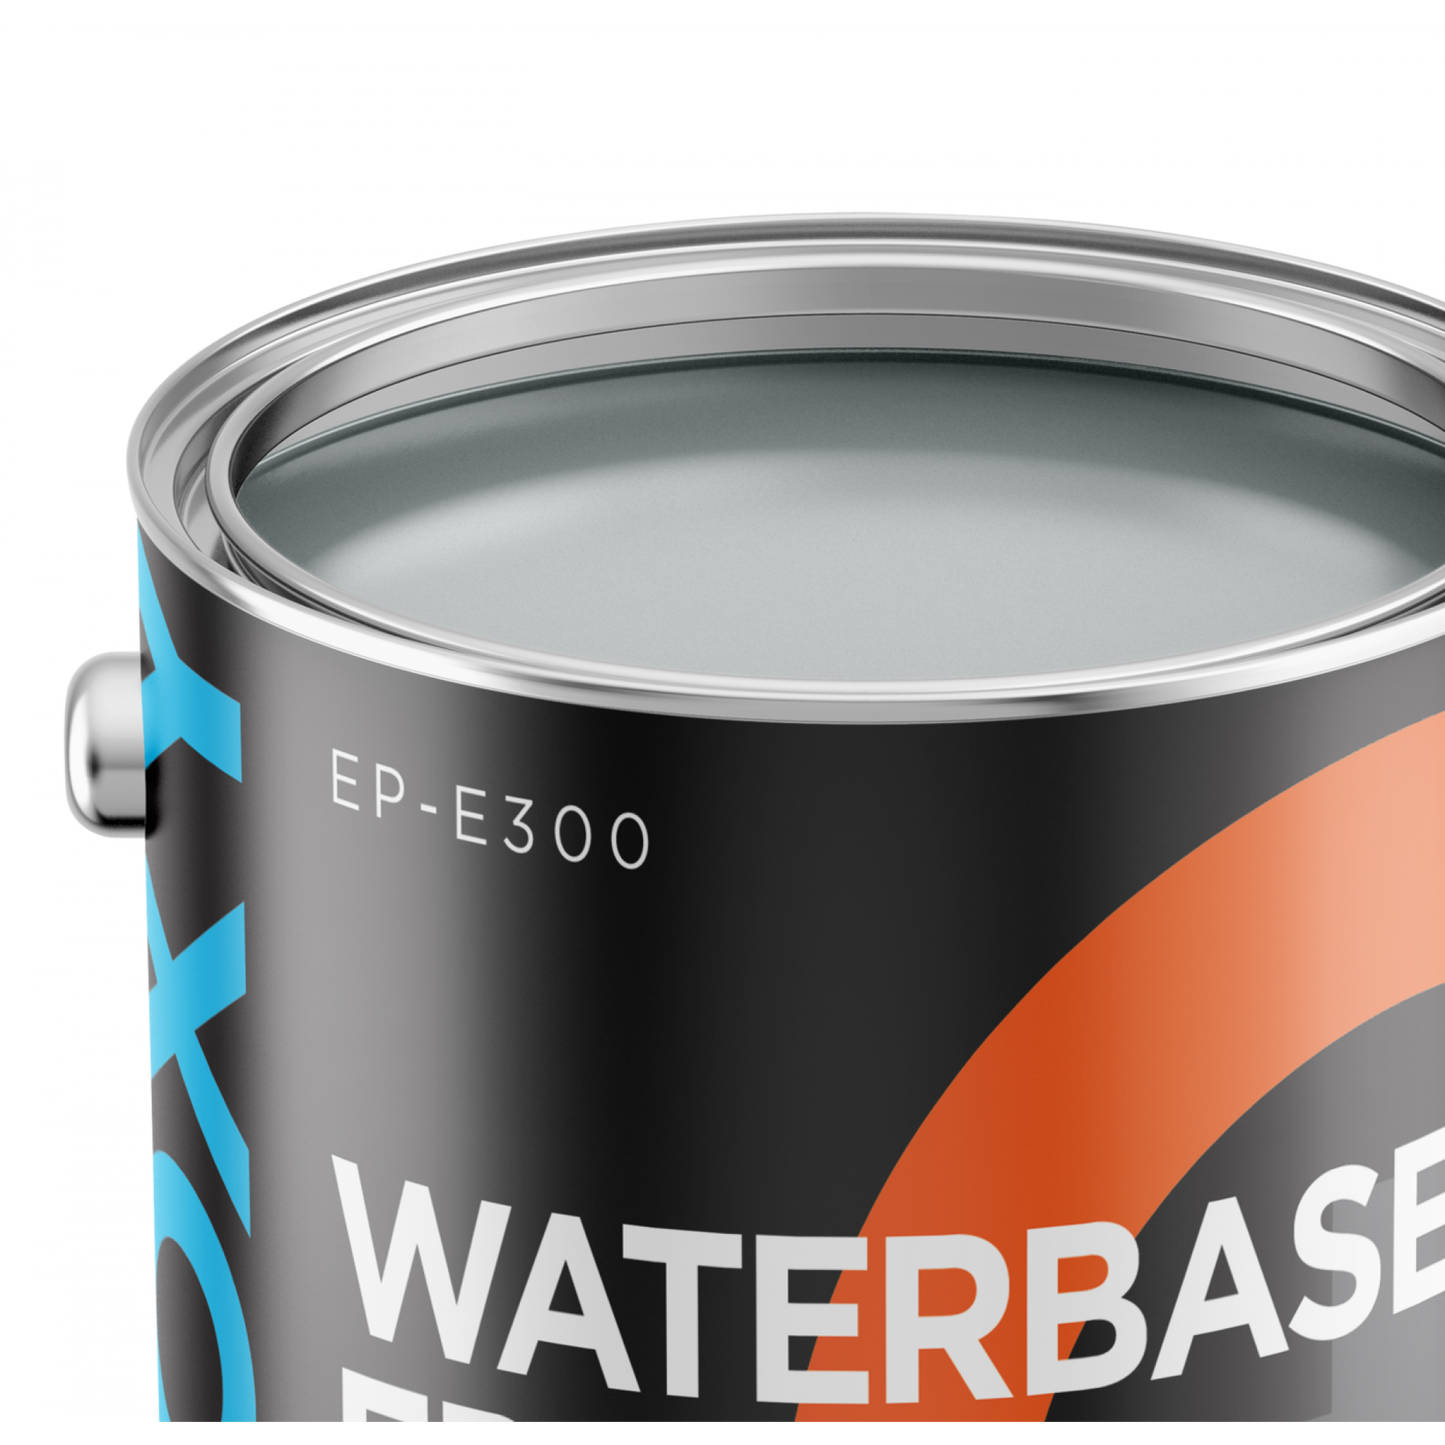 Stylish and Sustainable: Light Grey Water-Based Epoxy for a modern finish